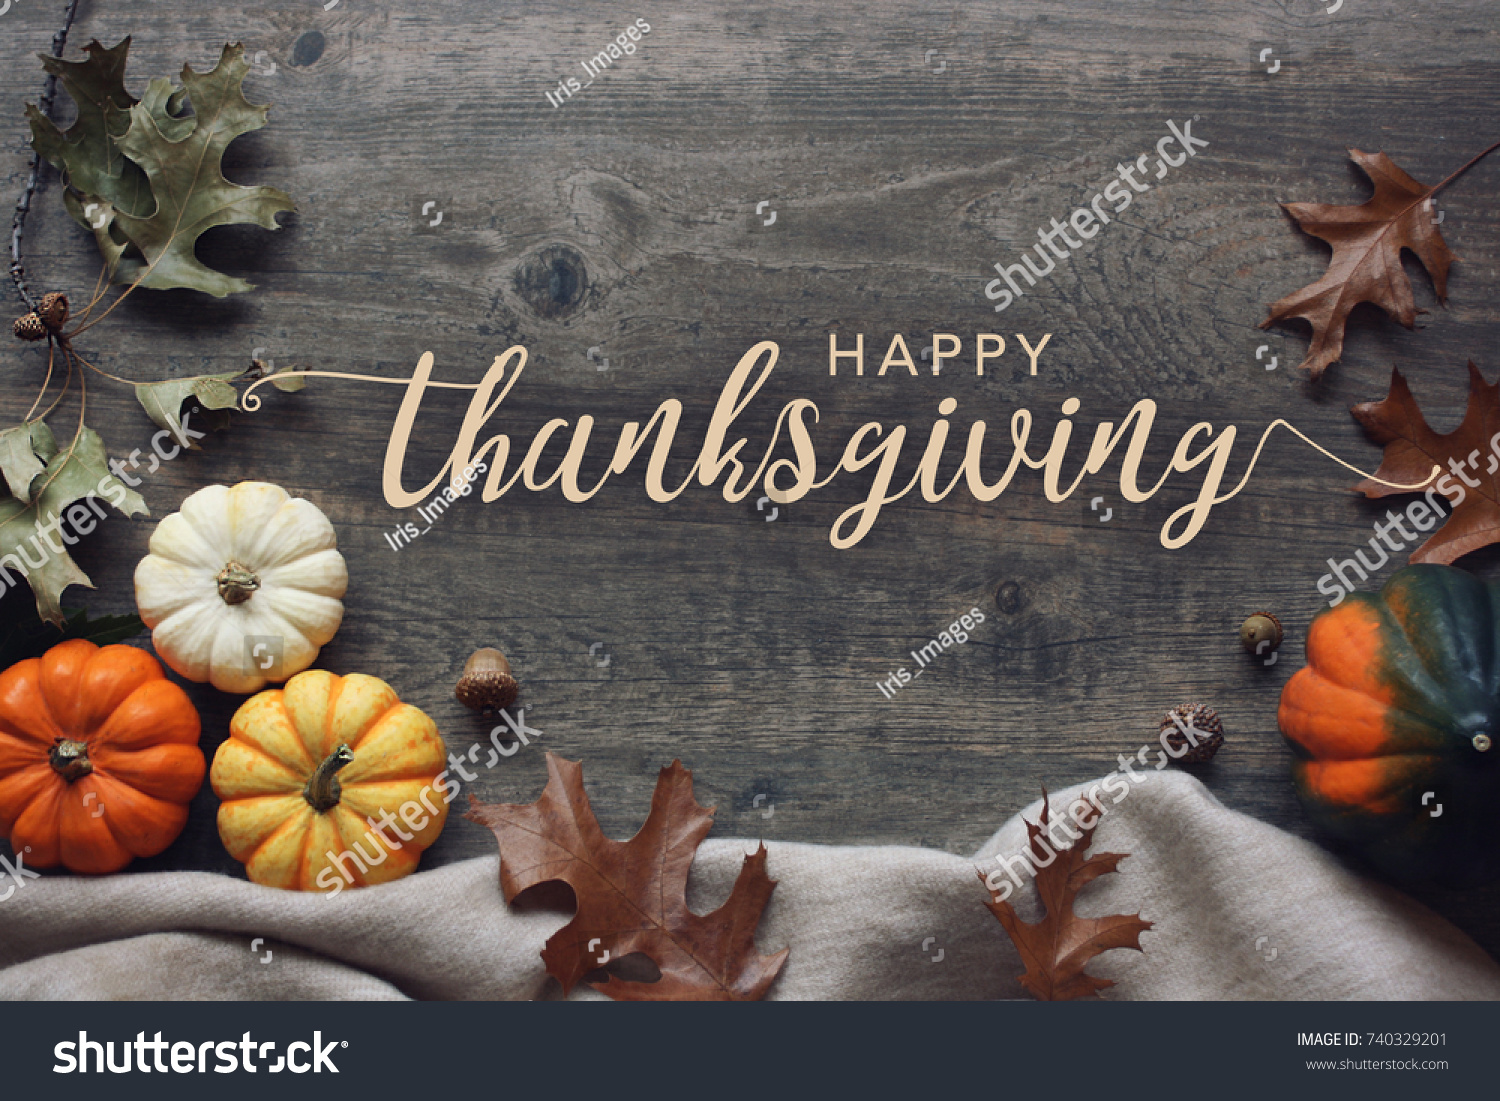 Happy Thanksgiving script with pumpkins and leaves over dark wooden background #740329201